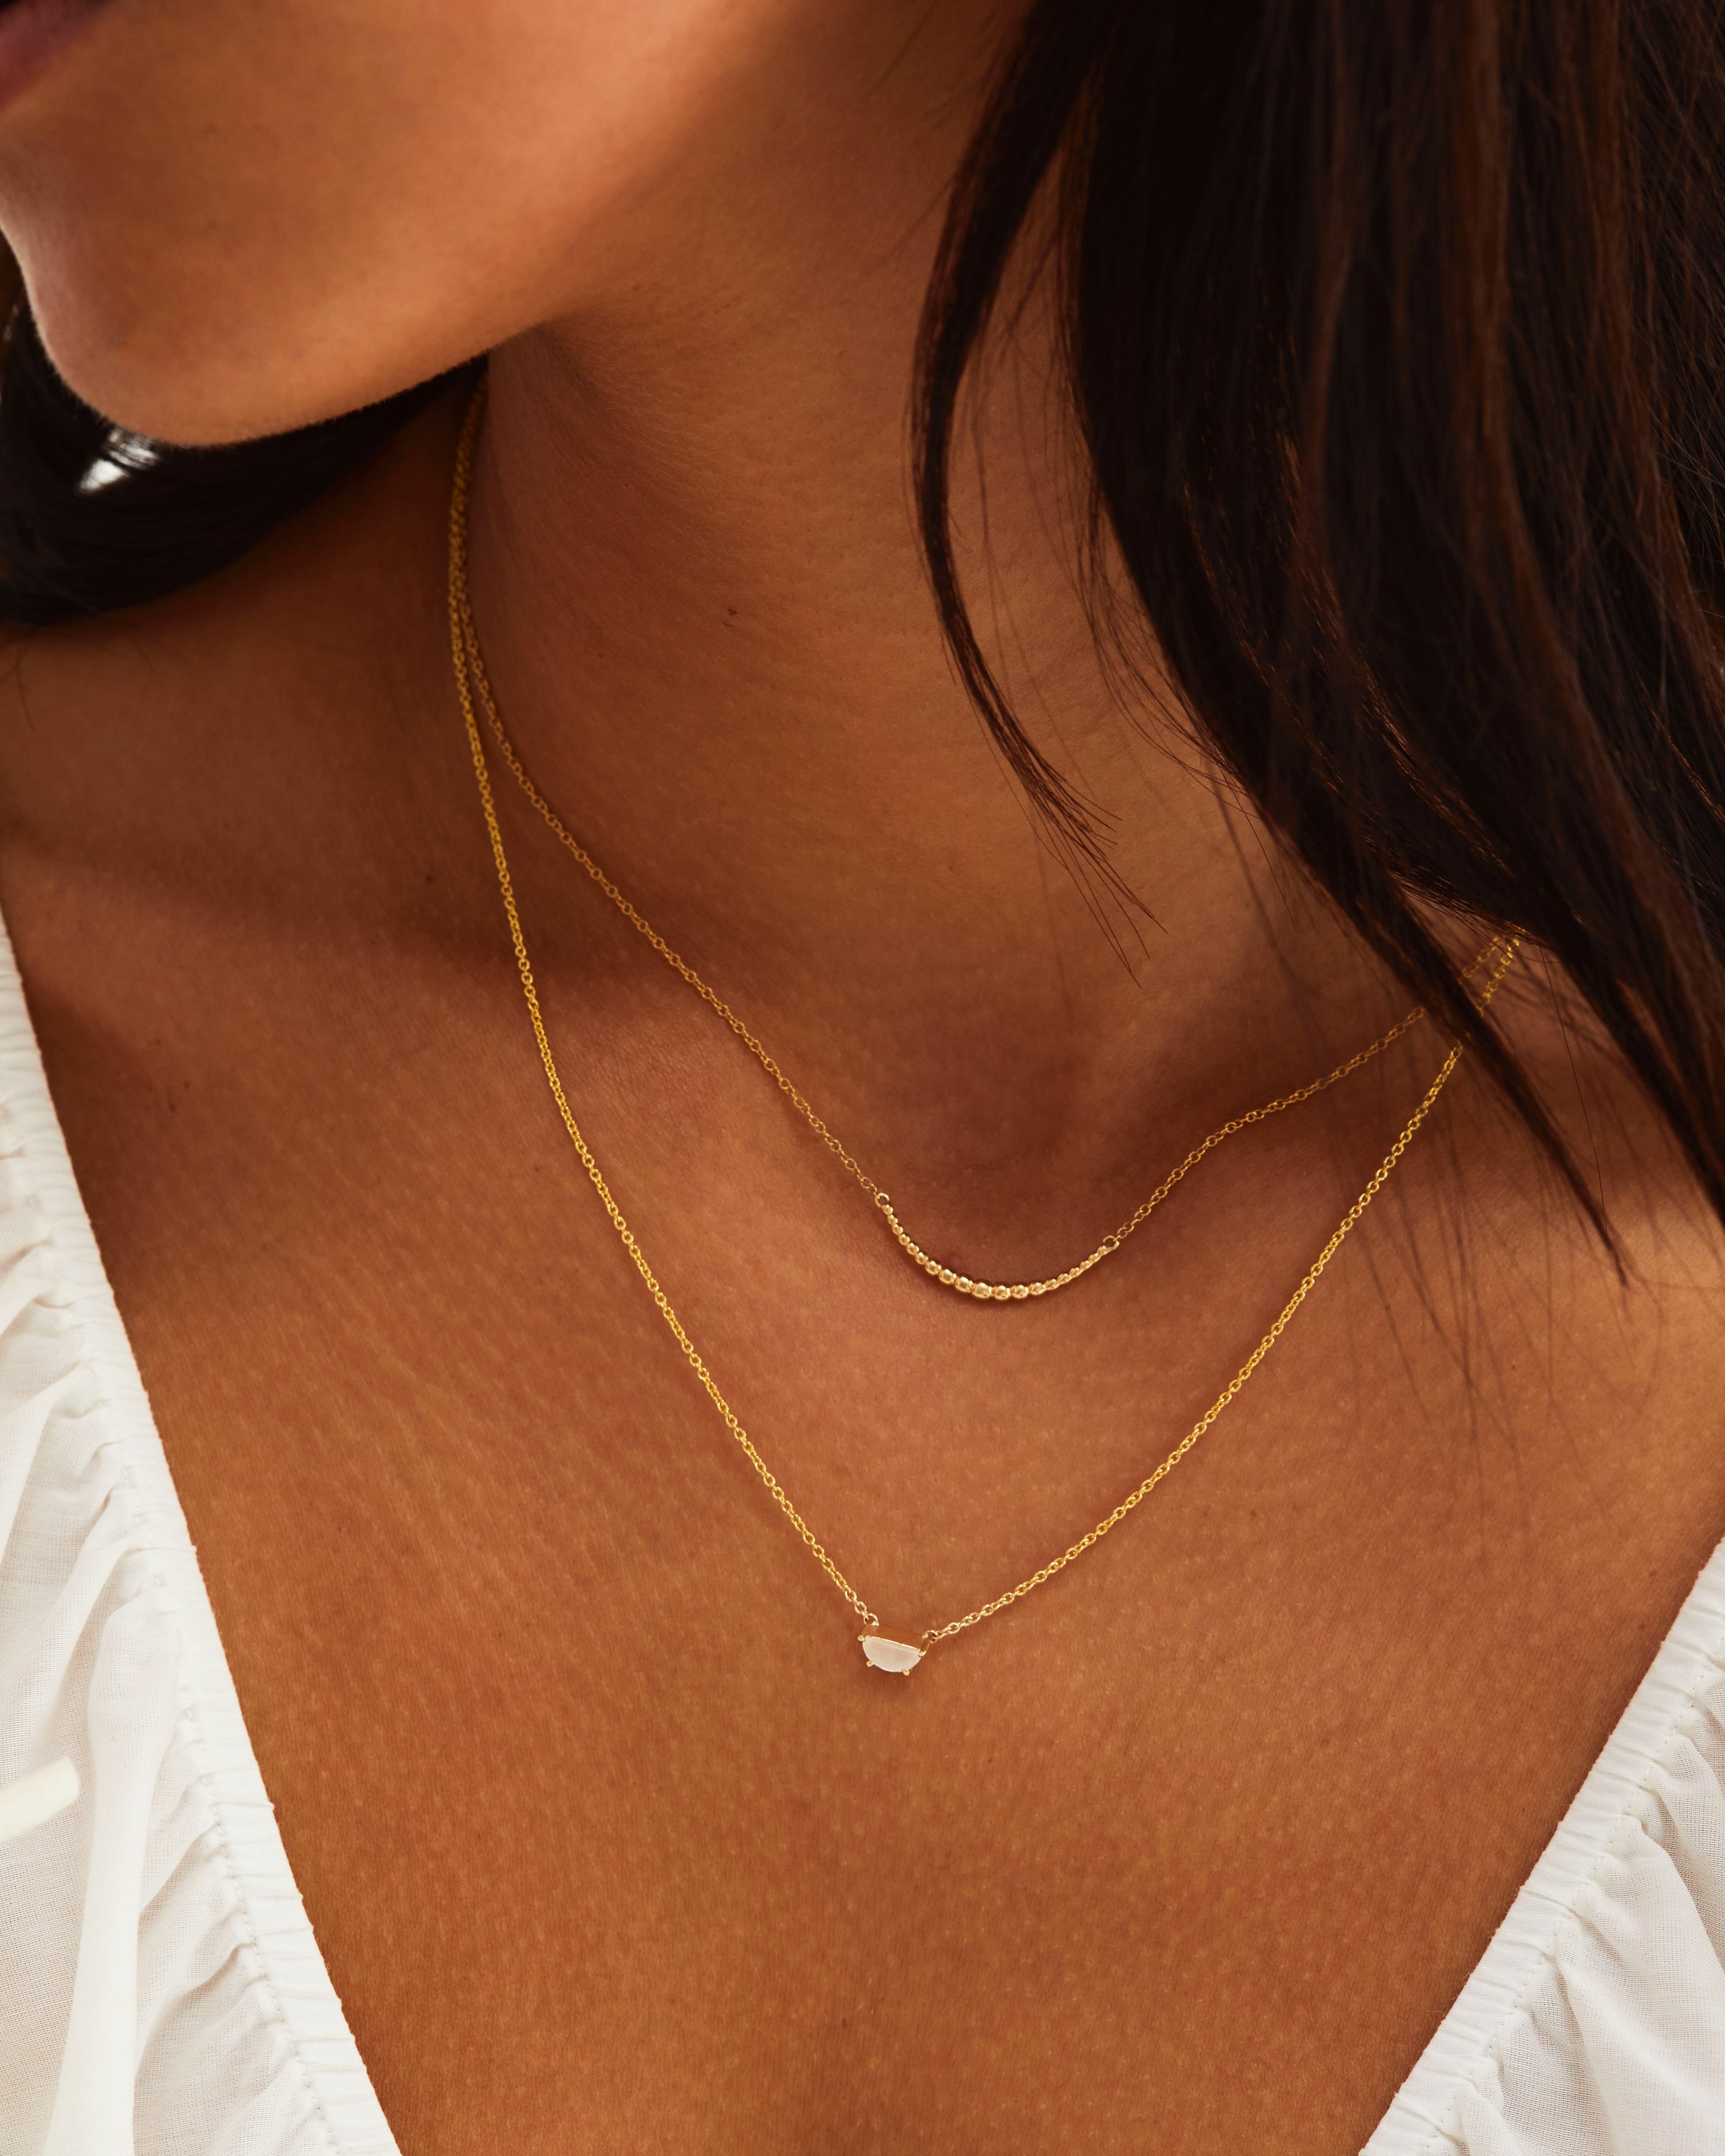 A model wears our gold crescent necklace layered with a moonstone necklace